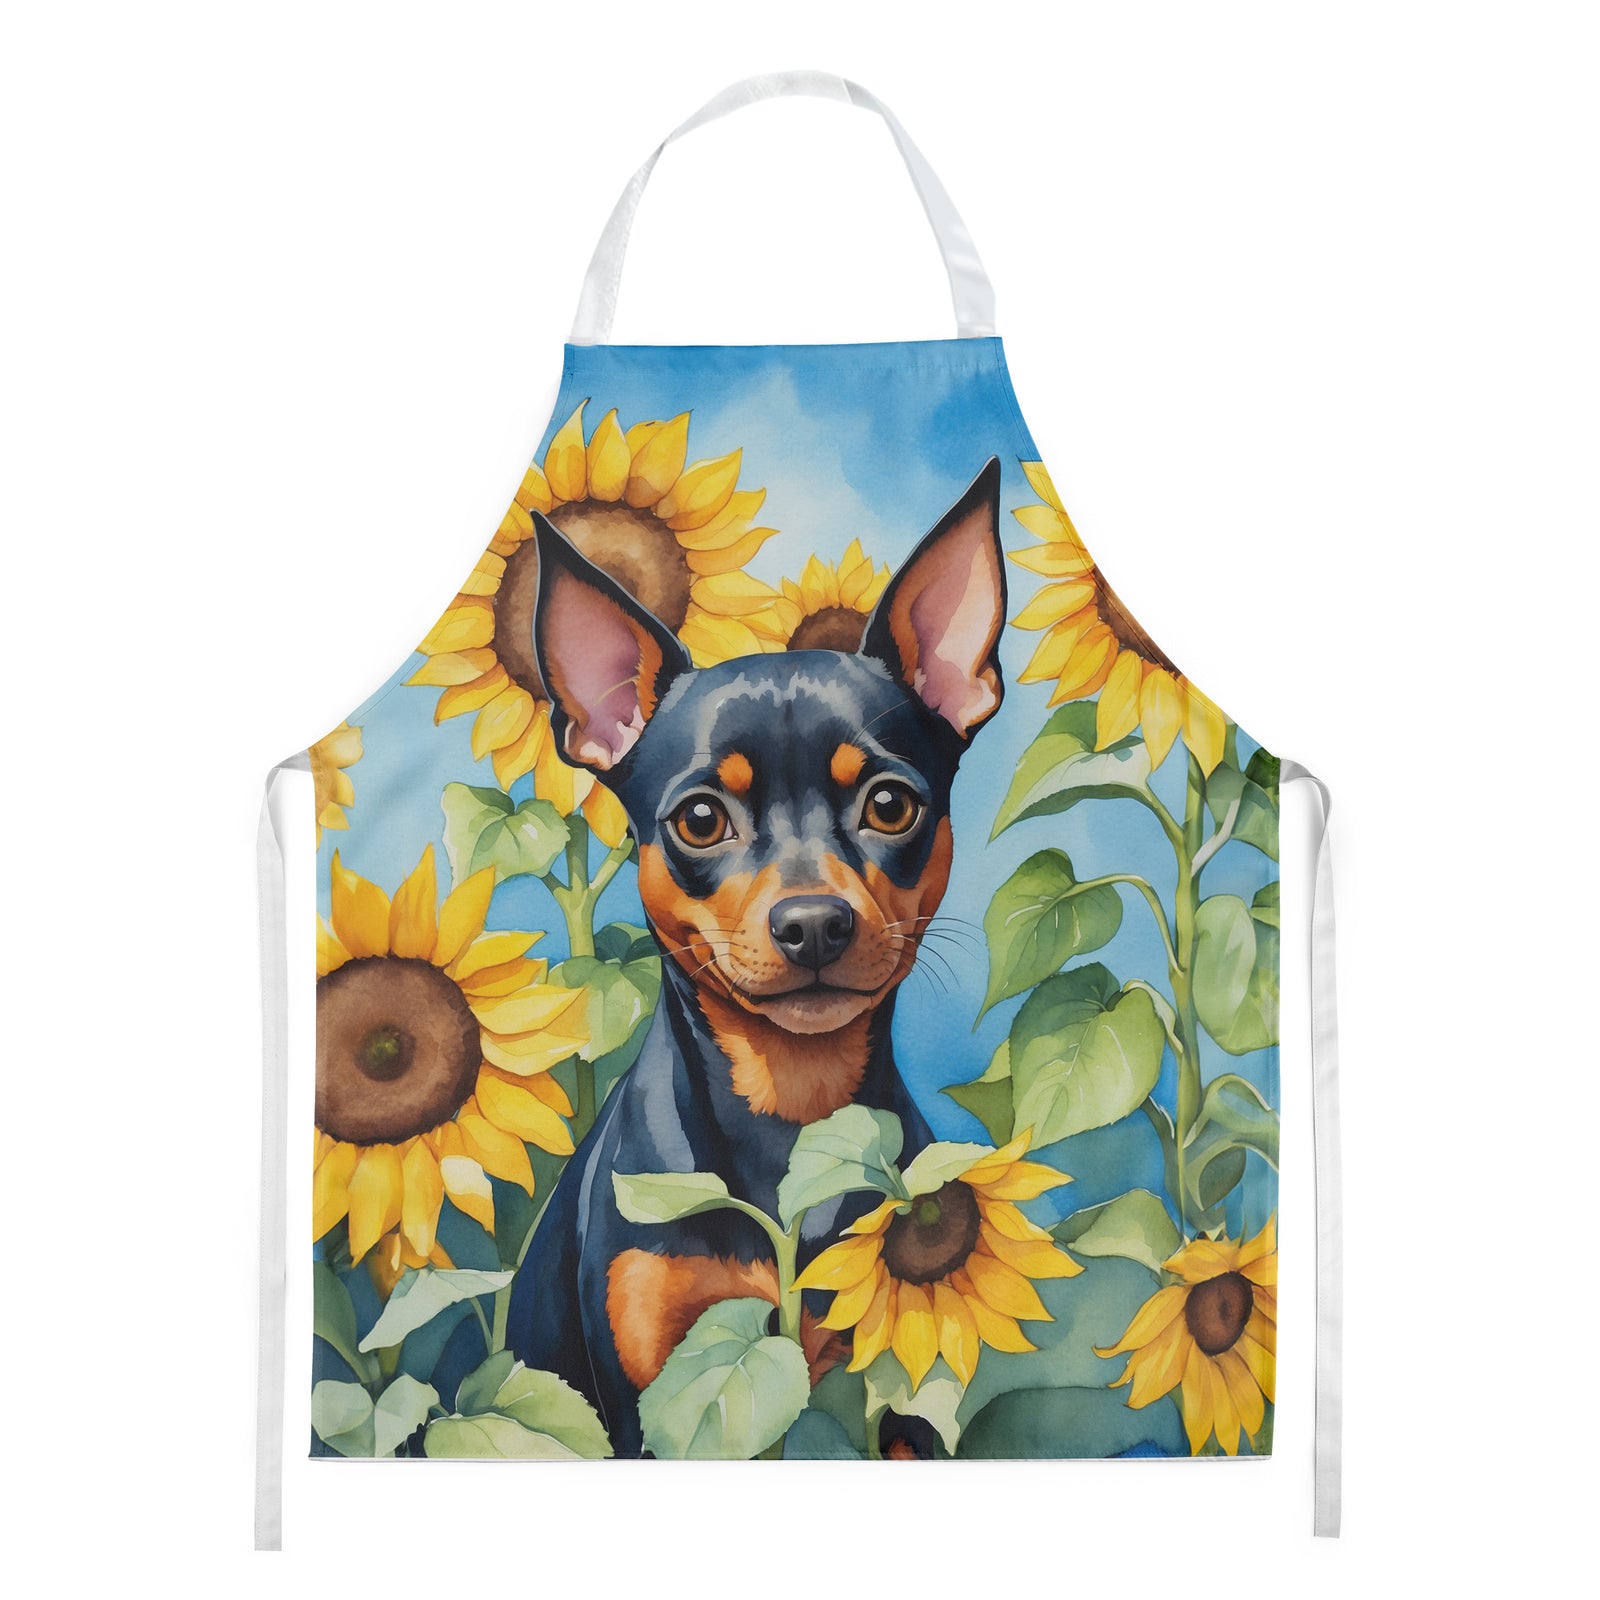 Buy this Miniature Pinscher in Sunflowers Apron